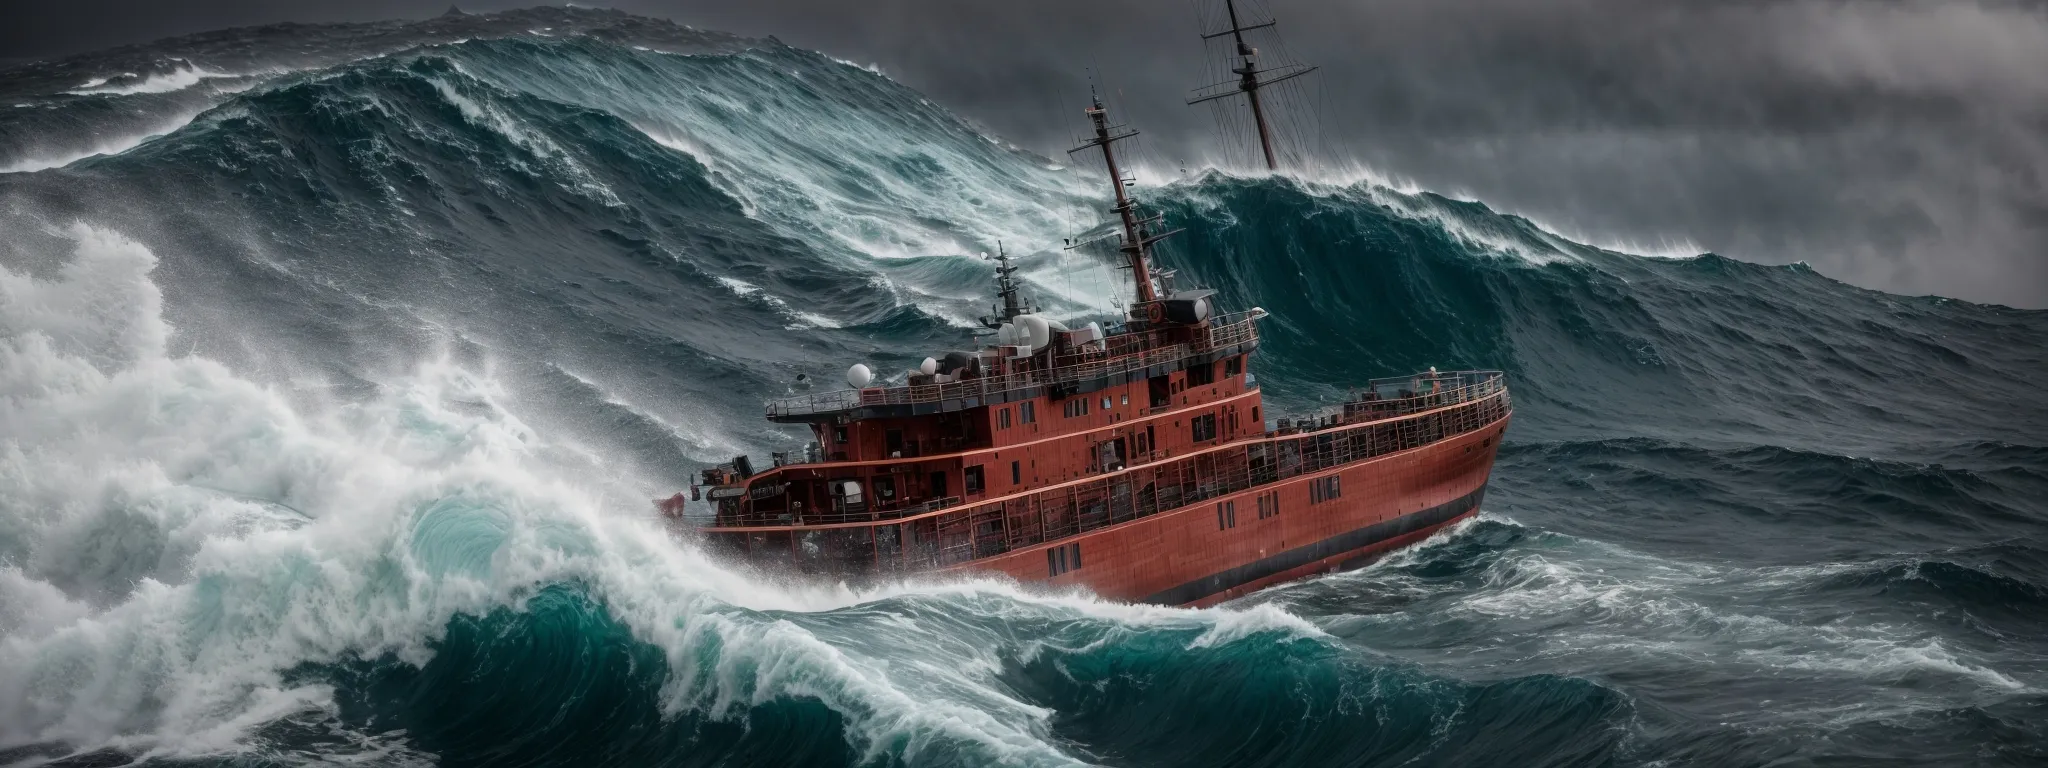 a ship navigating stormy ocean waves, symbolizing the perilous journey of seo navigation.